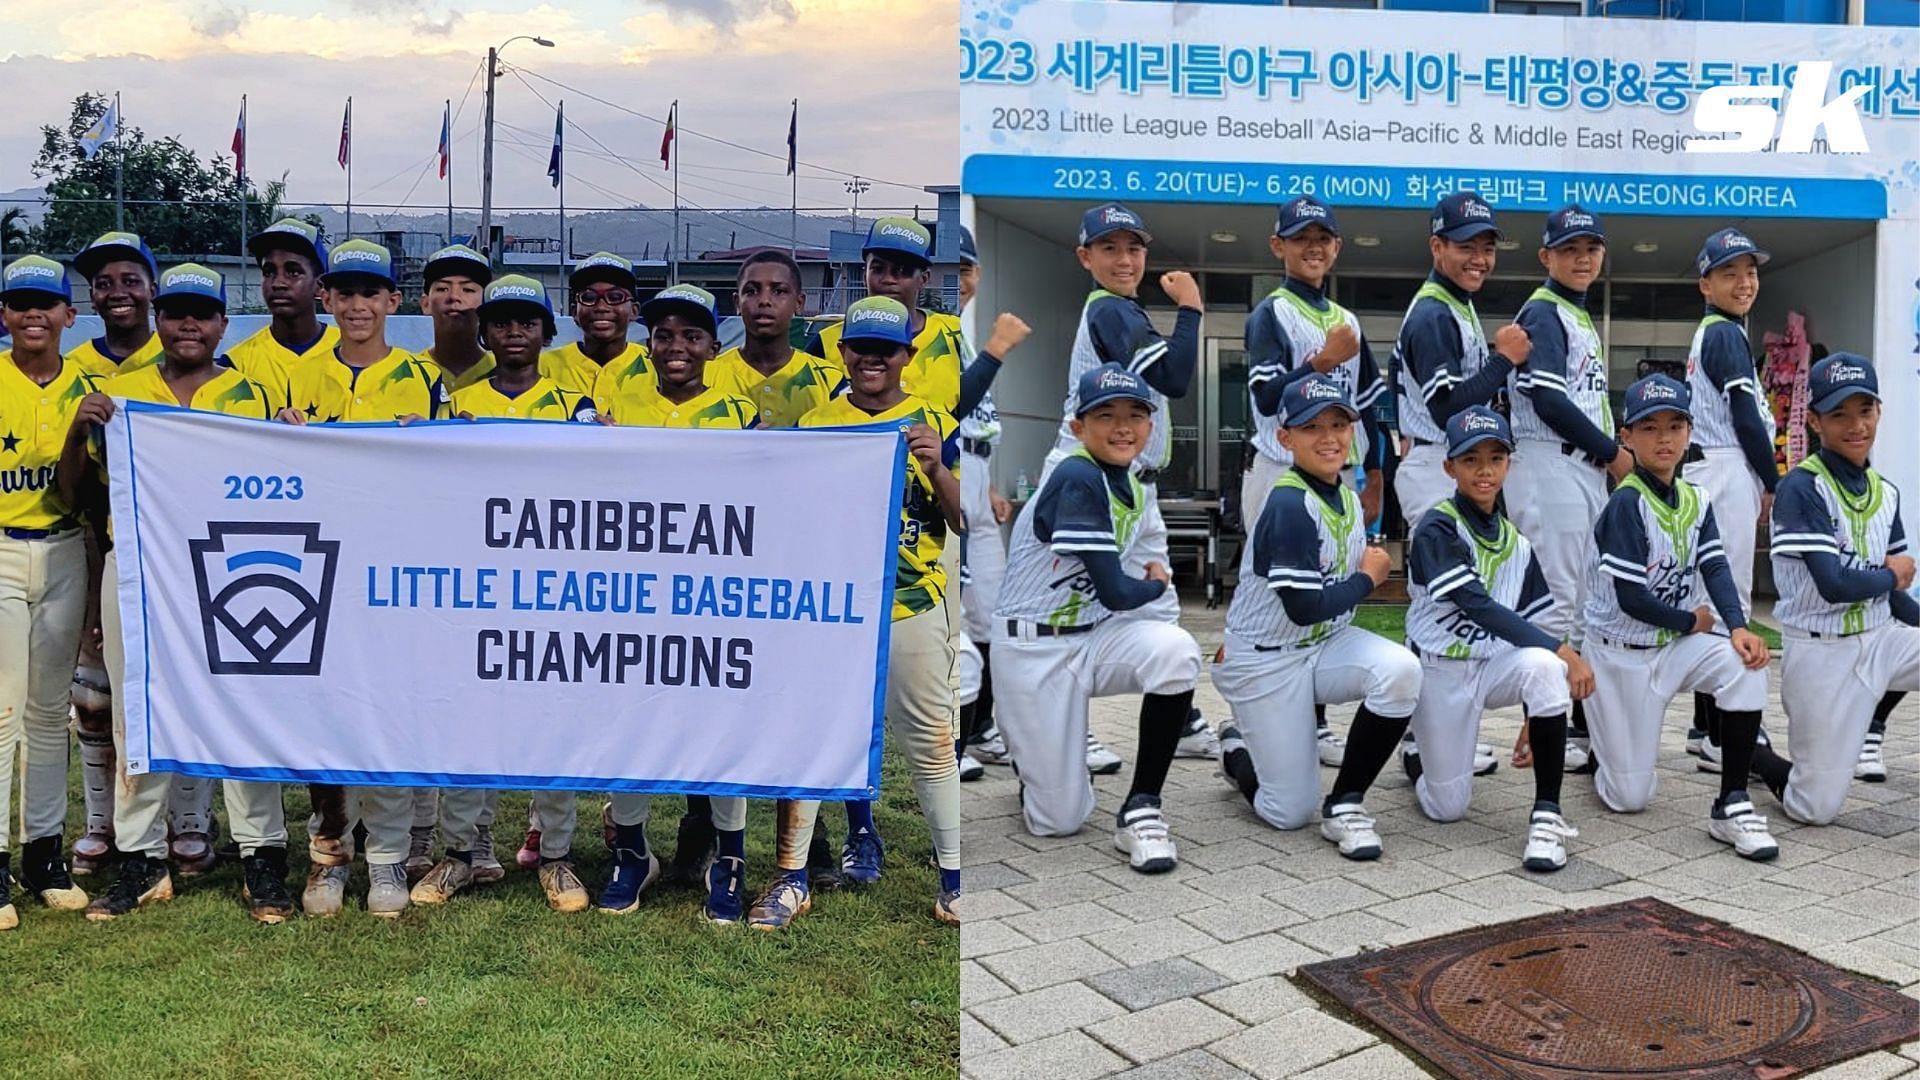 Mexico Qualifies For 2023 Caribbean Baseball Series Semifinals, News